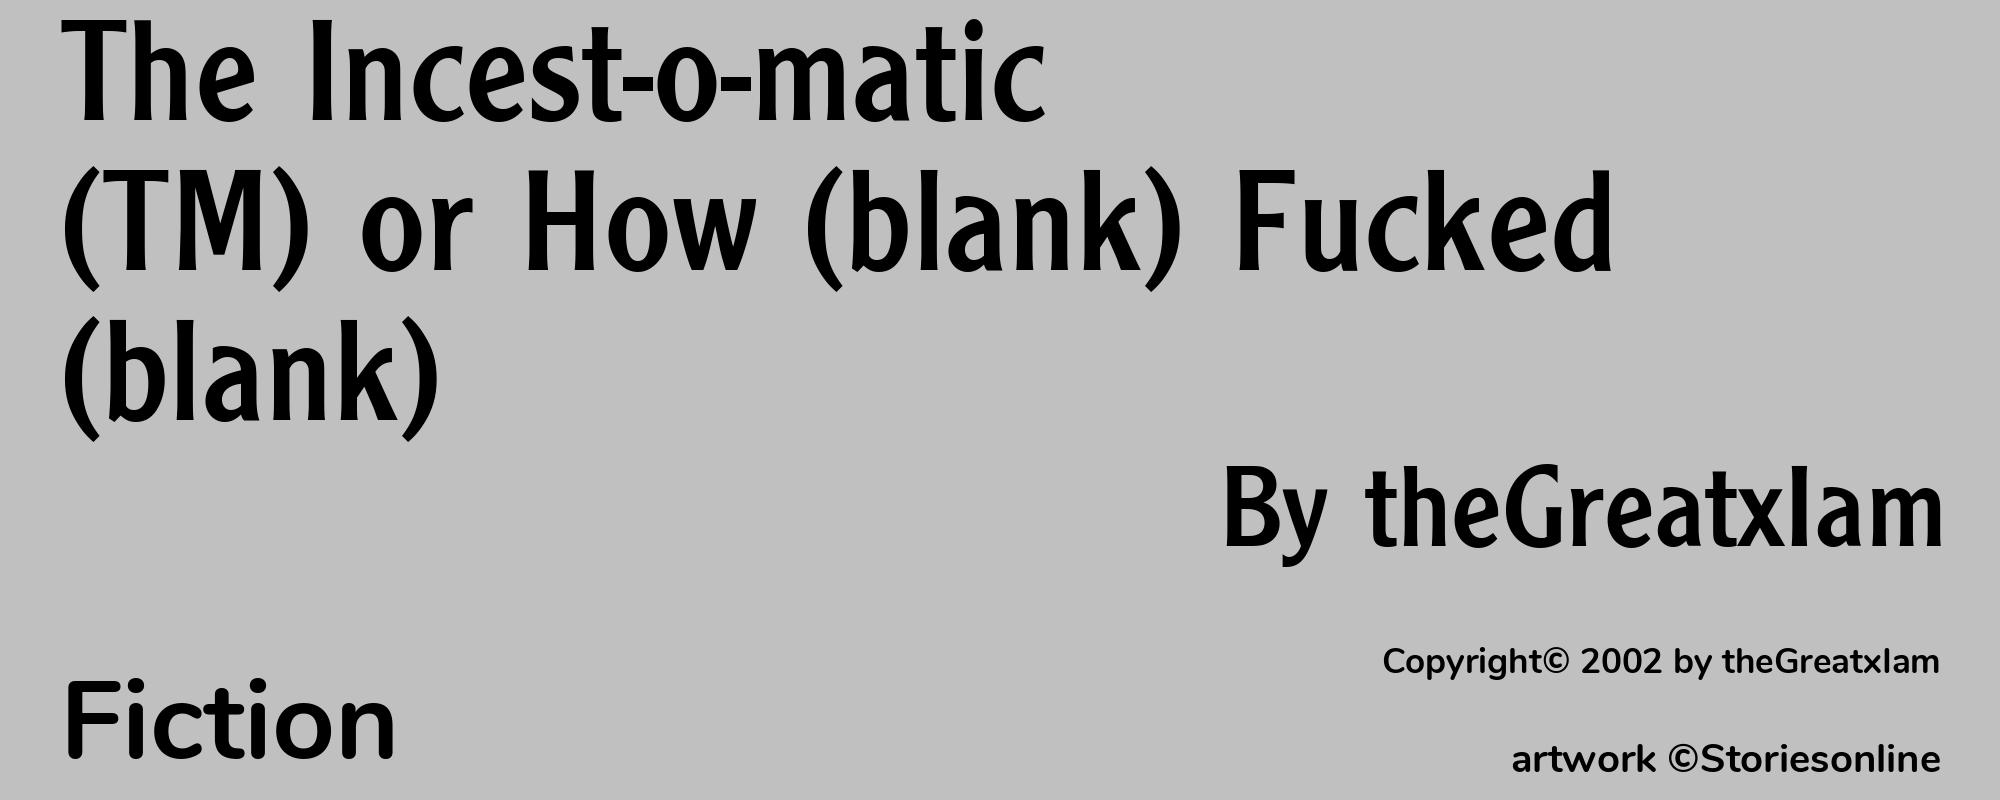 The Incest-o-matic (TM) or How (blank) Fucked (blank) - Cover